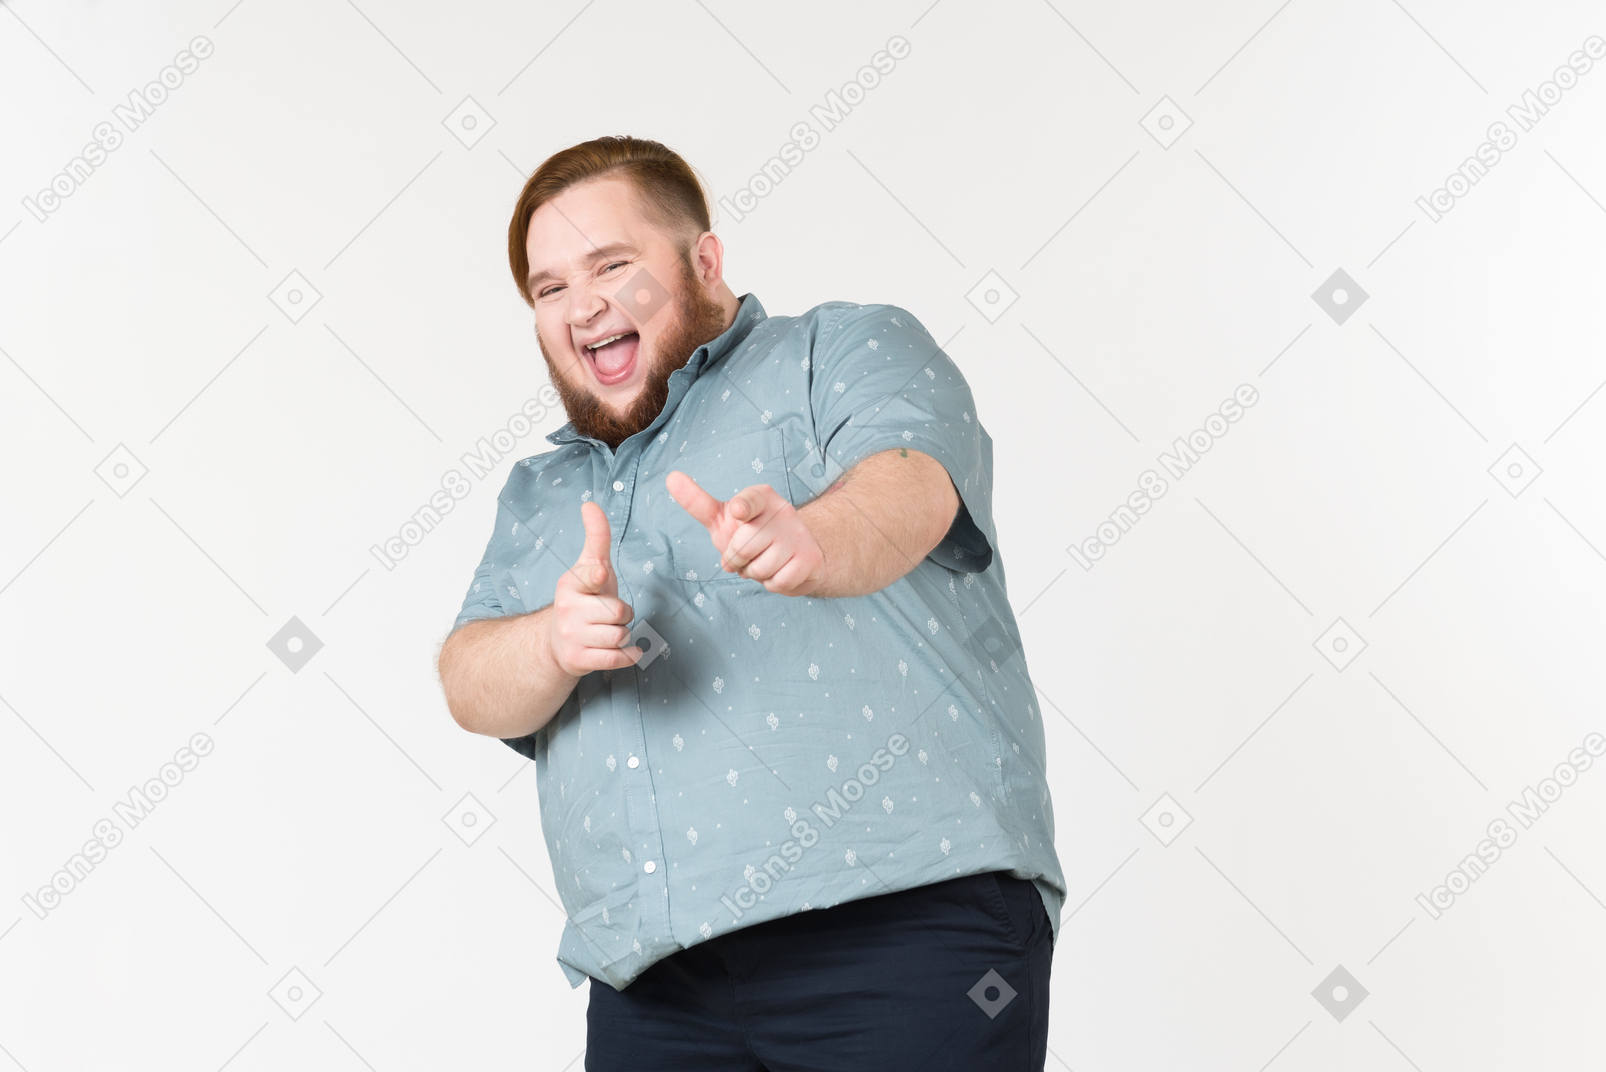 Laughing young overweight man pointing forward